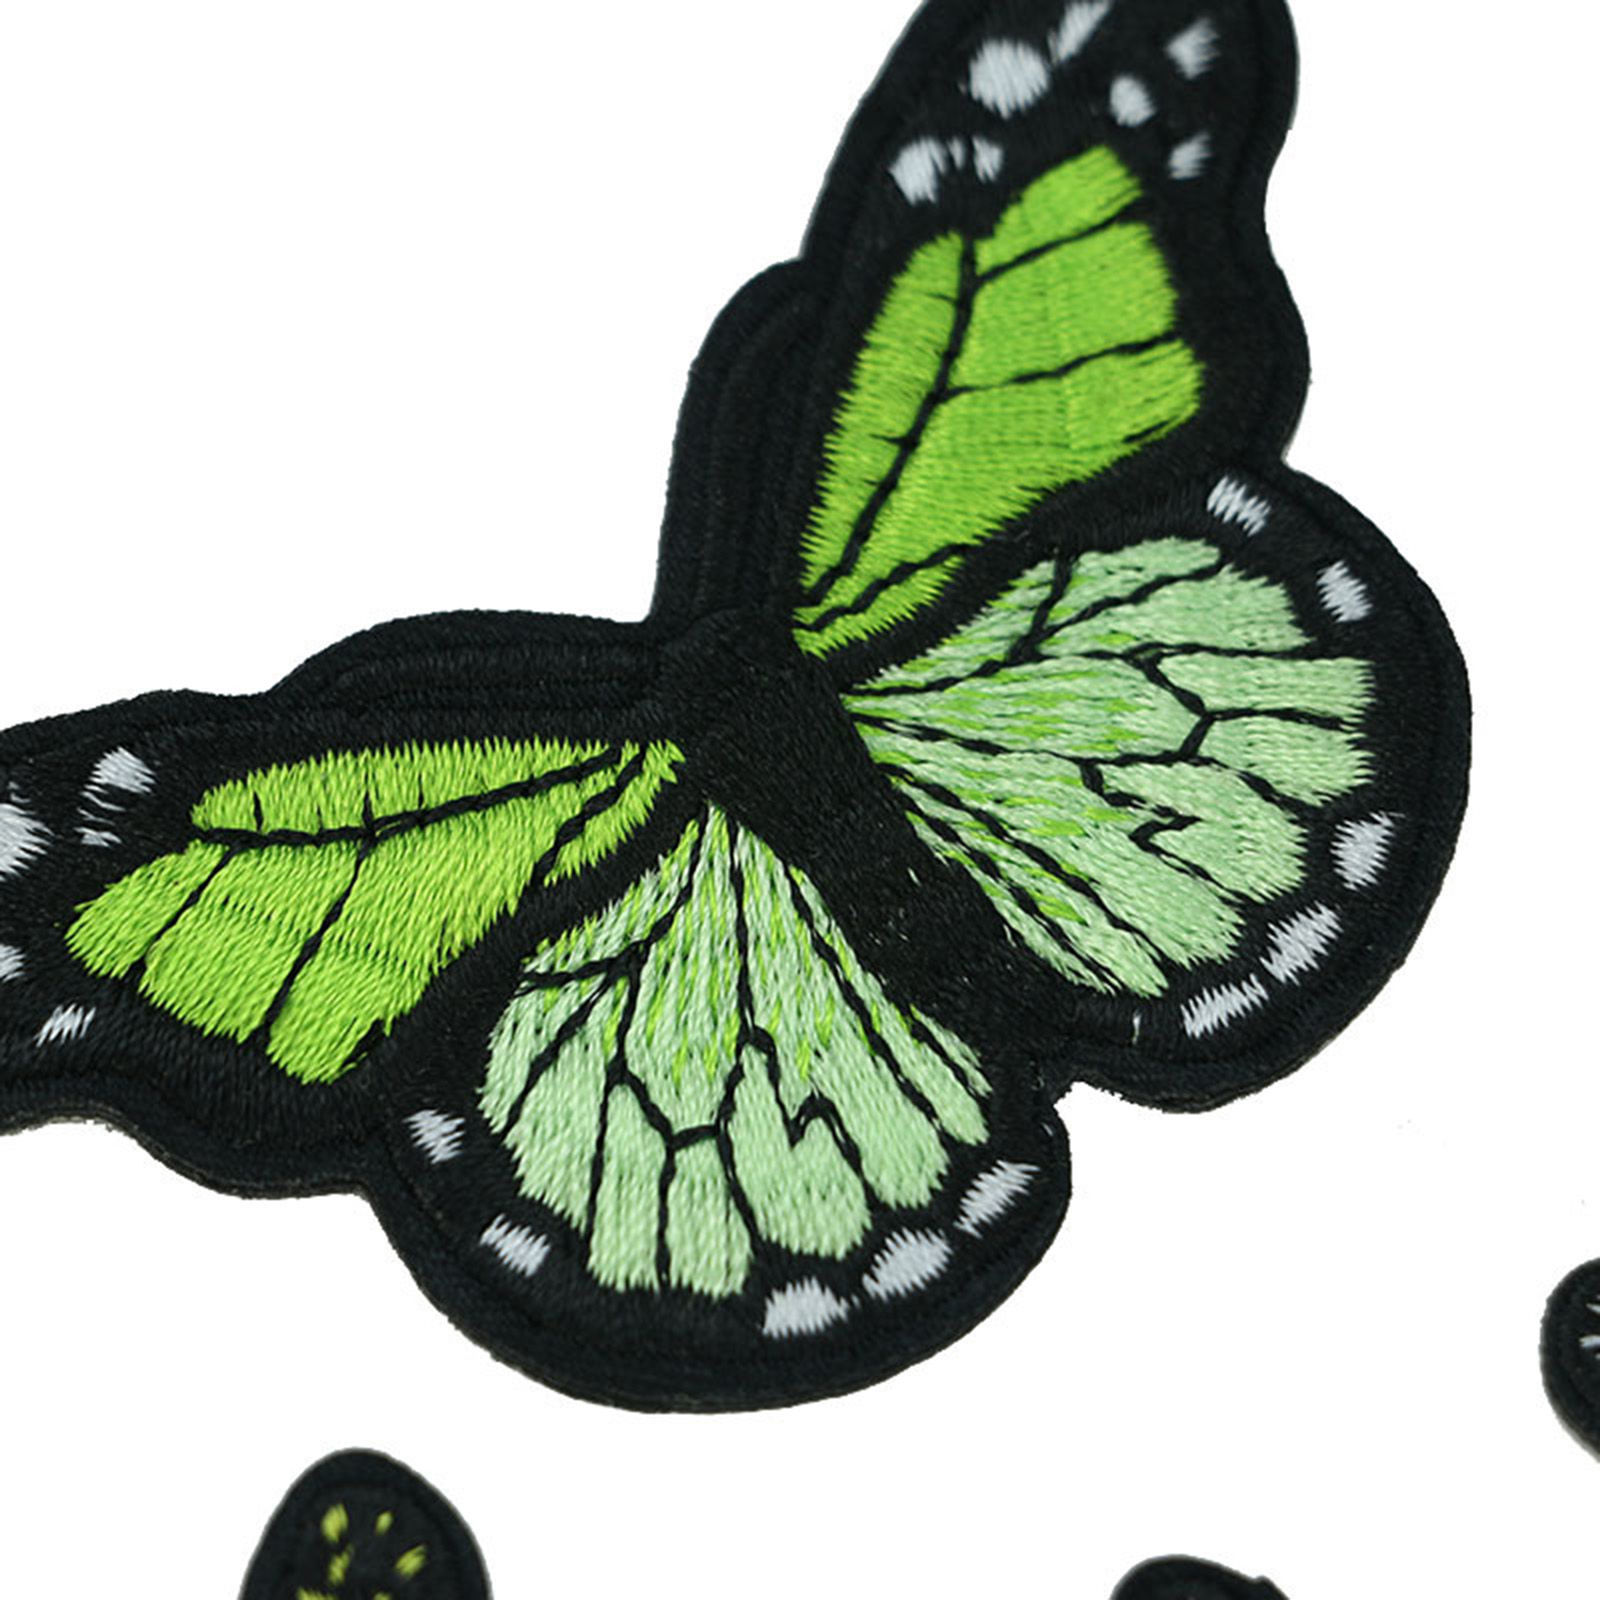 Picture of Fabric Embroidery Iron On Patches Appliques (With Glue Back) DIY Sewing Craft Clothing Decoration Multicolor Butterfly Animal 78mm x 48mm